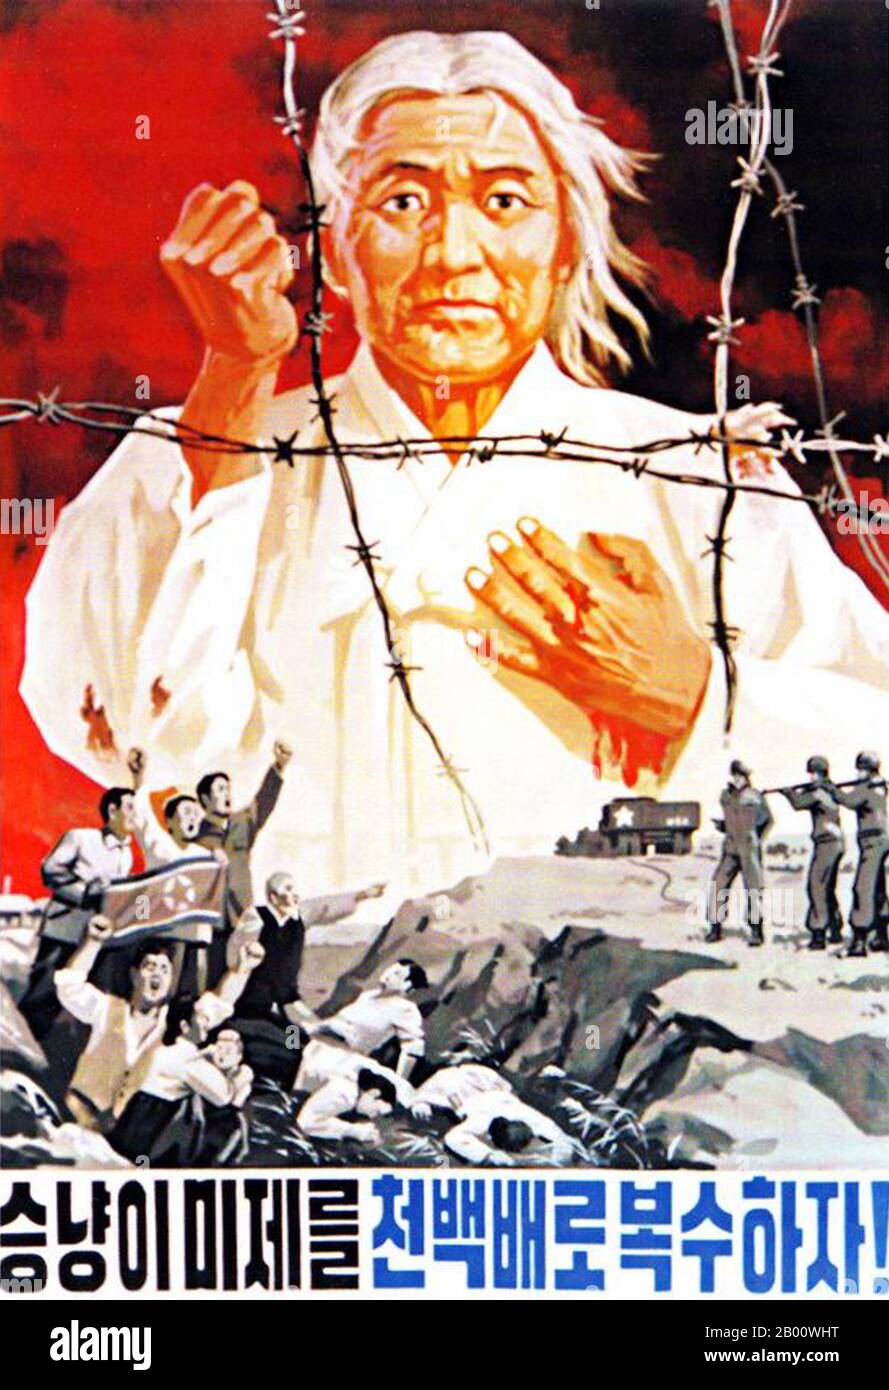 Korea: North Korean (DPRK) propaganda poster: Resolutely Oppose the American Imperialist Wolves!  Socialist realism is a style of realistic art which developed under Socialism in the Soviet Union and became a dominant style in other communist countries. Socialist realism is a teleologically-oriented style having as its purpose the furtherance of the goals of socialism and communism. Although related, it should not be confused with Social realism, a type of art that realistically depicts subjects of social concern. Stock Photo